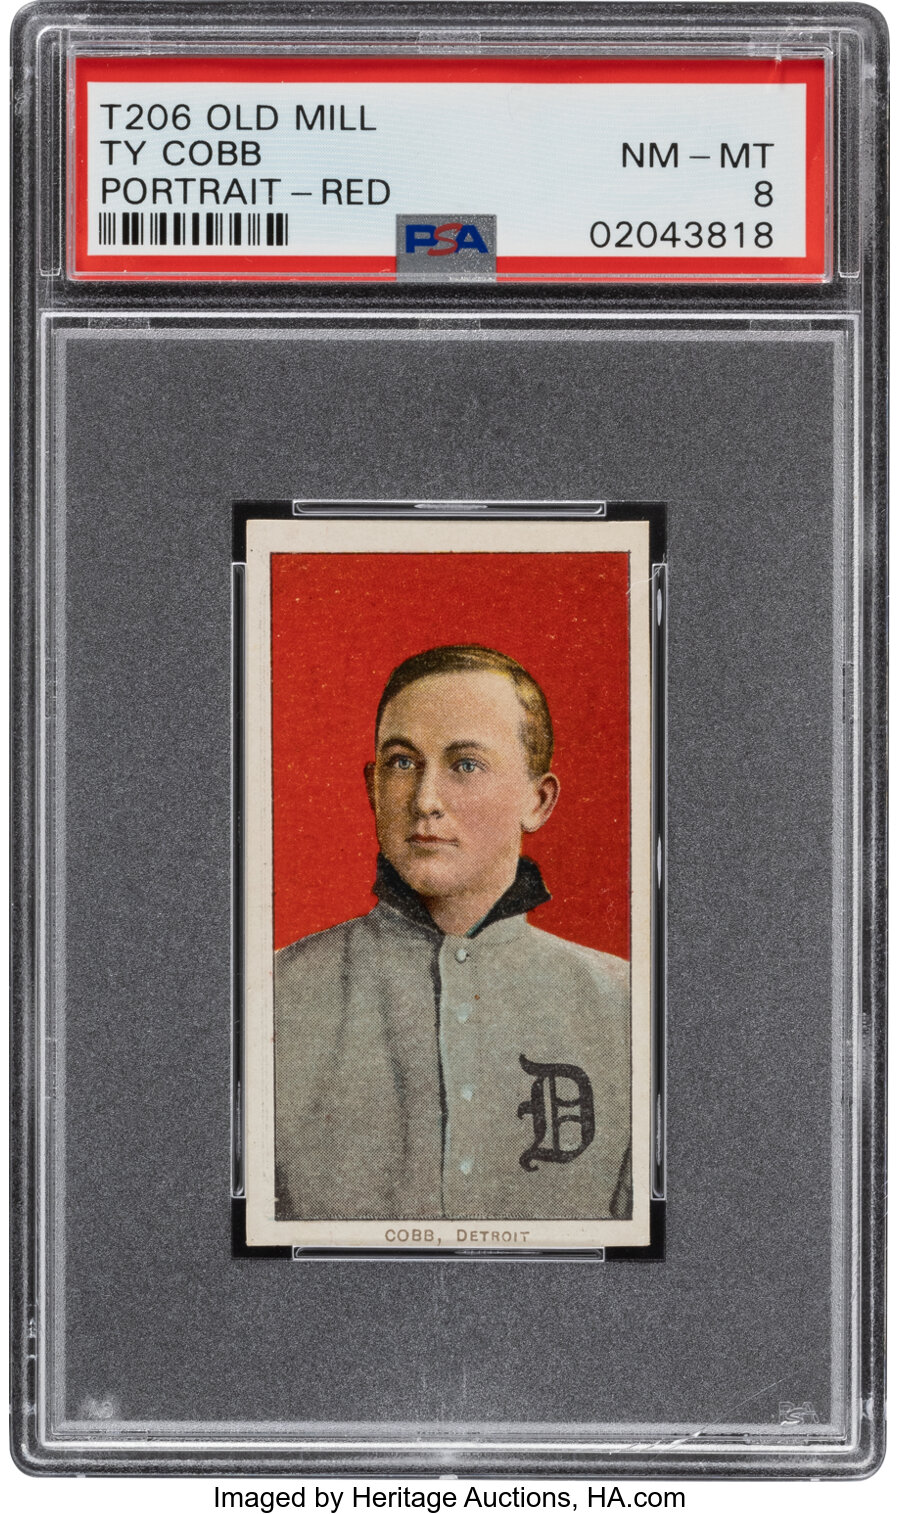 1909-11 T206 Old Mill Ty Cobb (Red Portrait) PSA NM-MT 8 - Pop One, None Higher!